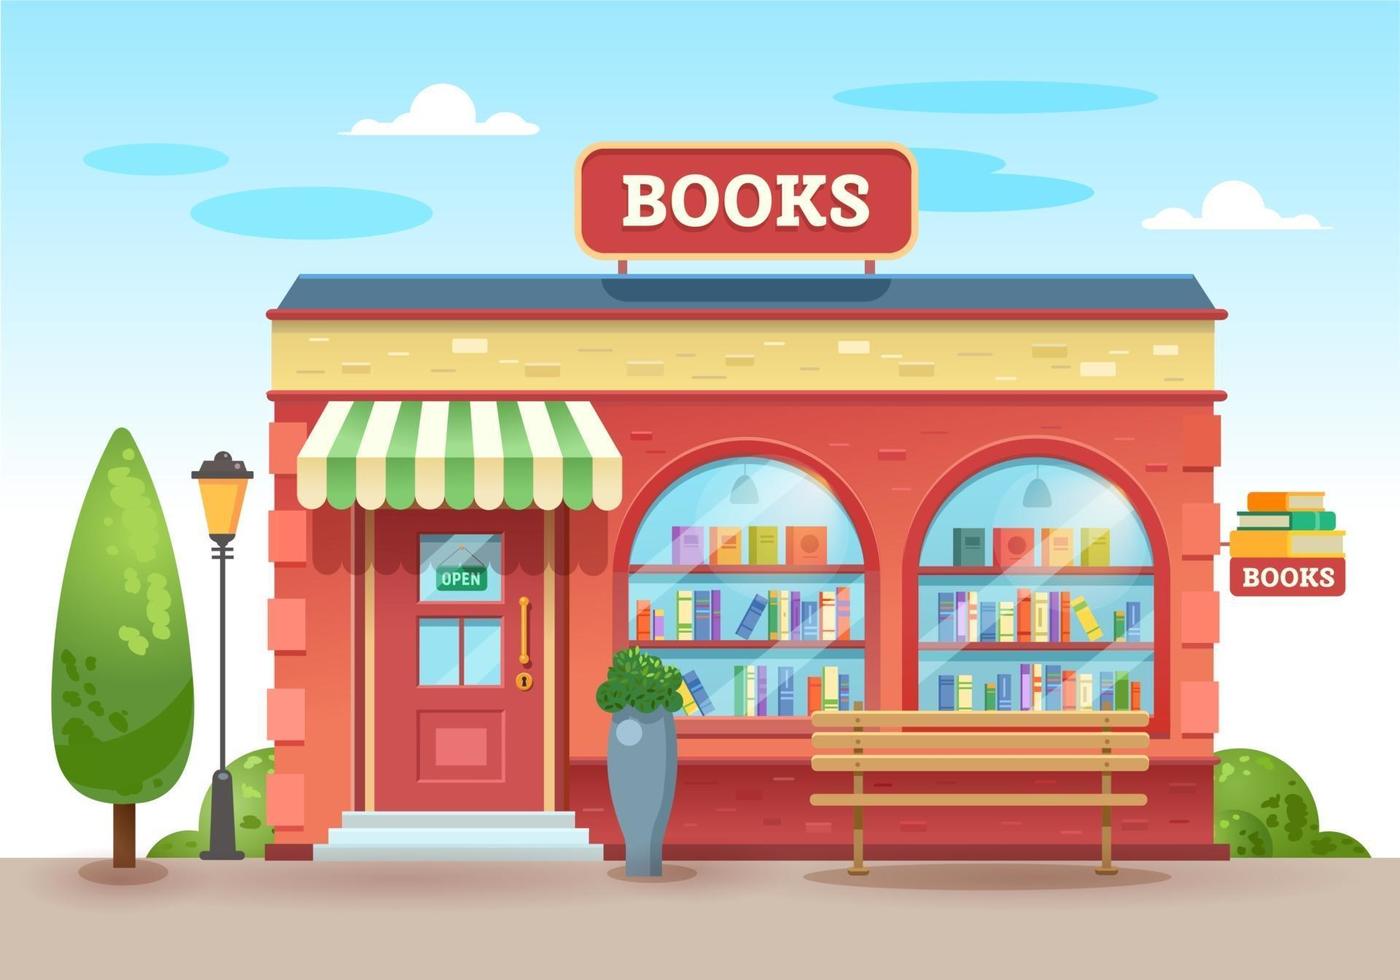 Bookstore with a visor above the entrance. Books in a shop window on shelves. Street shop. Vector illustration, flat style.